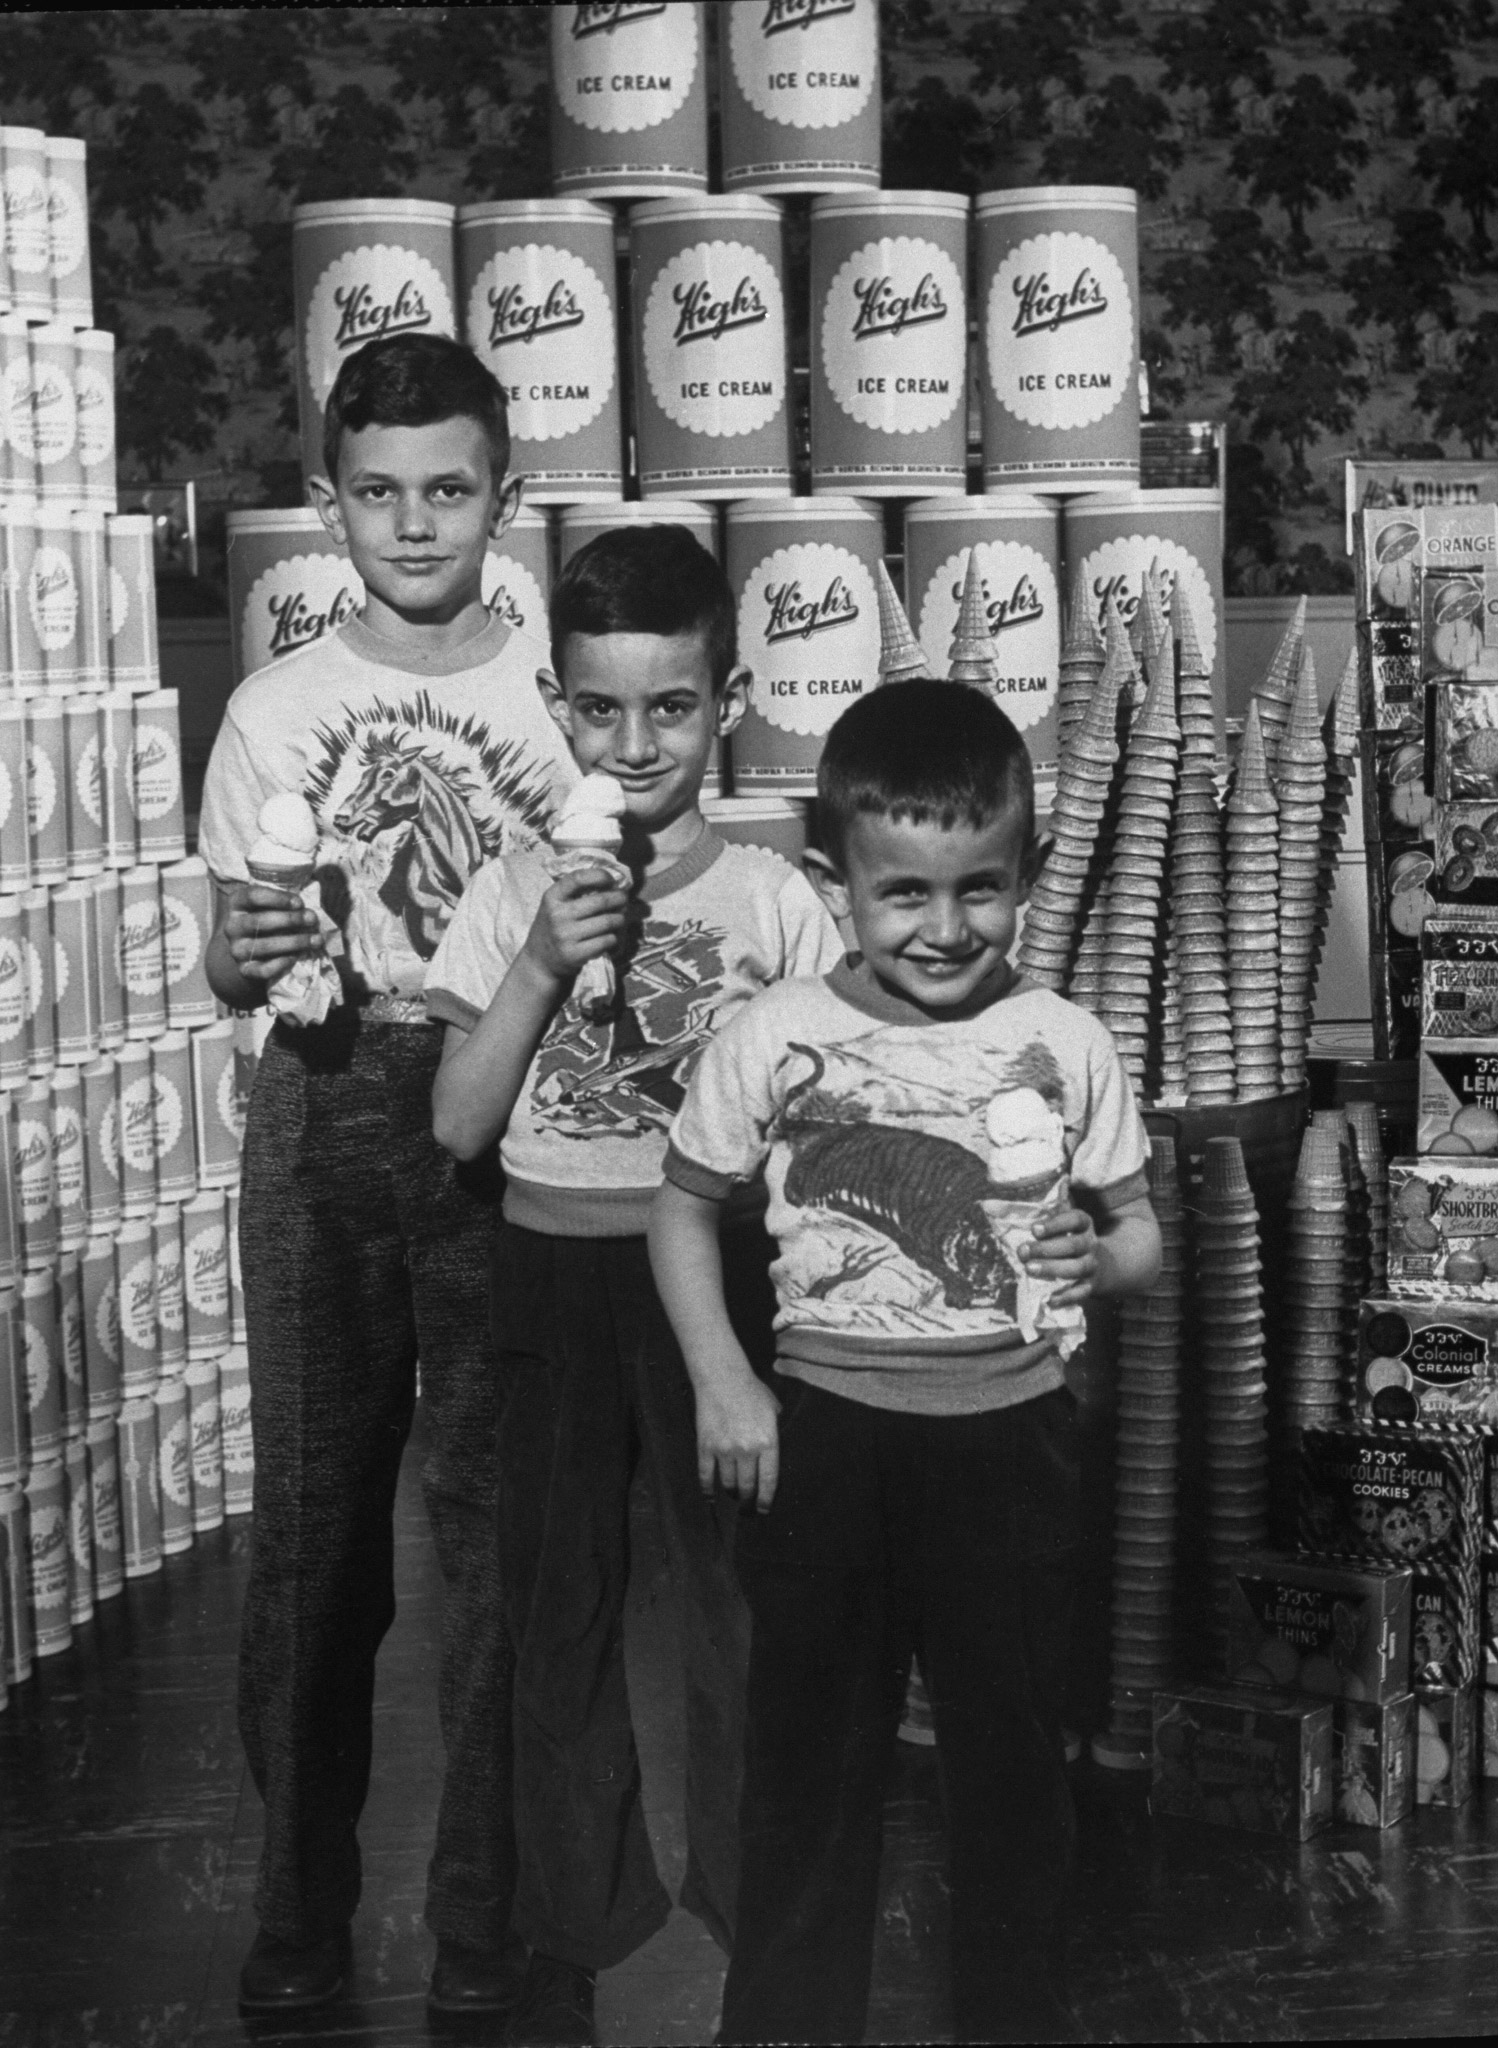 Charles, Stephen and Kenneth Winston standing with cartons of ice cream, cones and cookies representing a year's consumption, 1953.